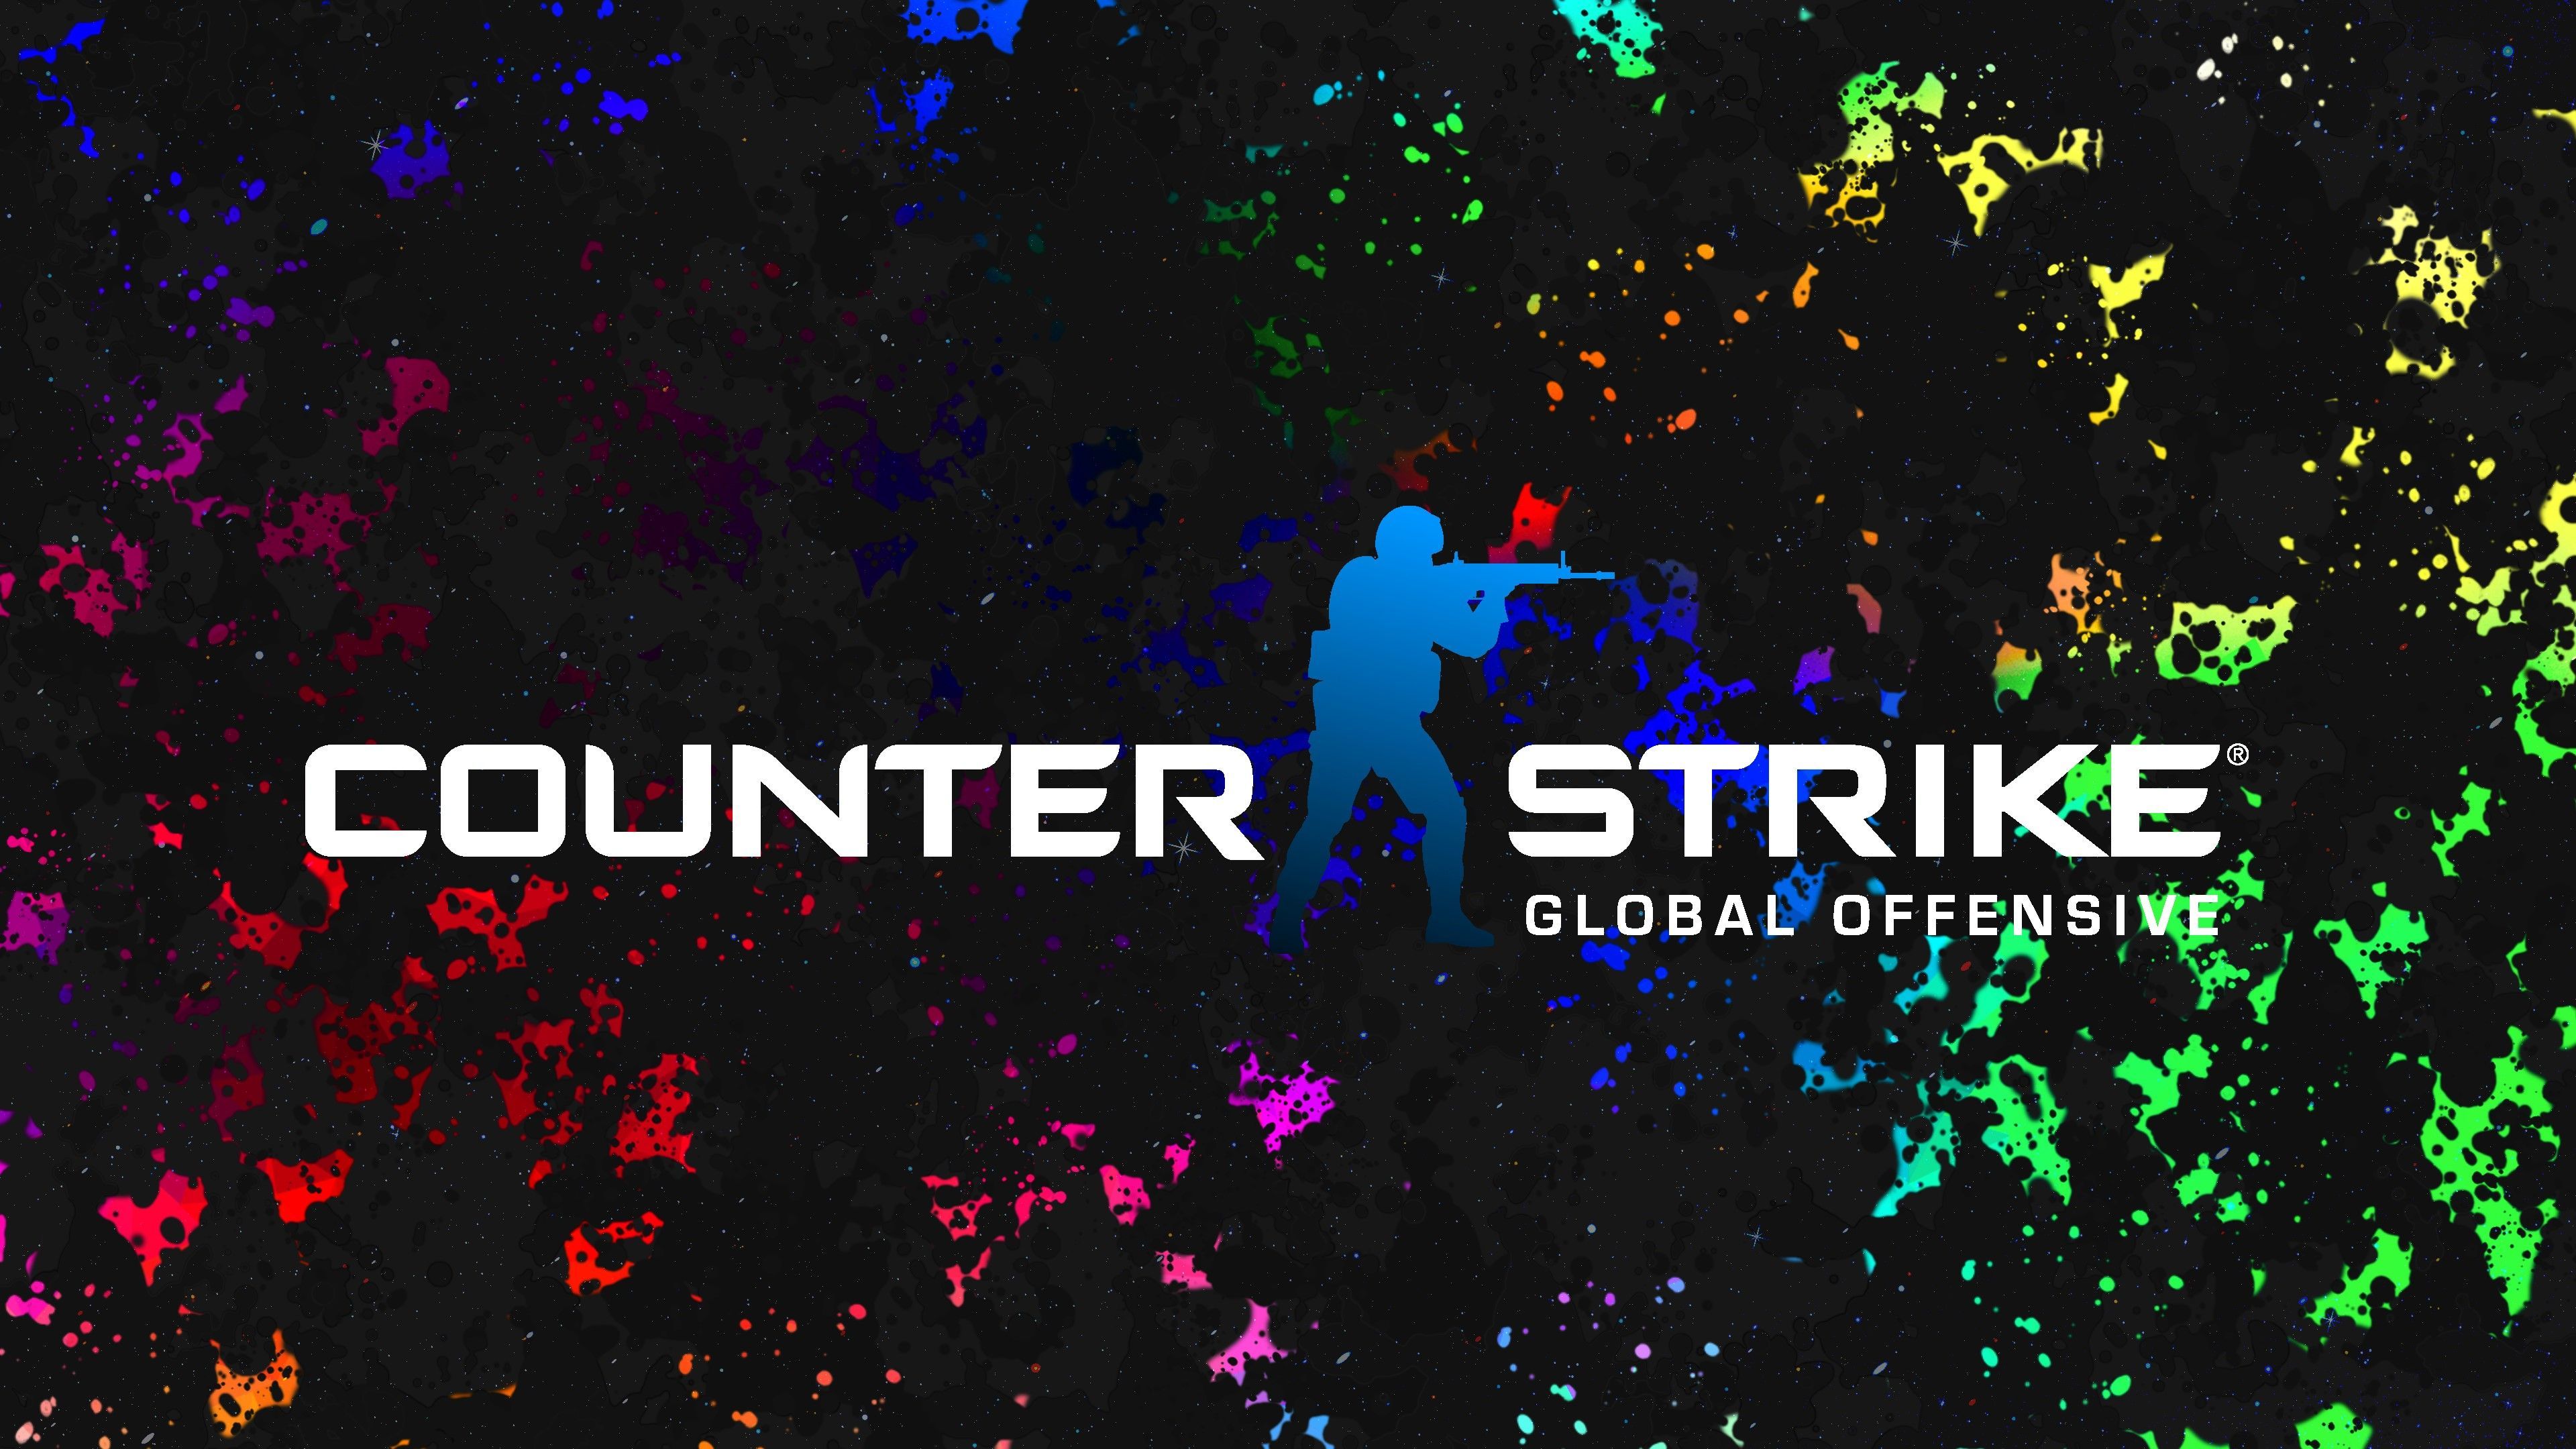 Global Offensive Counter-Strike Live Wallpaper 